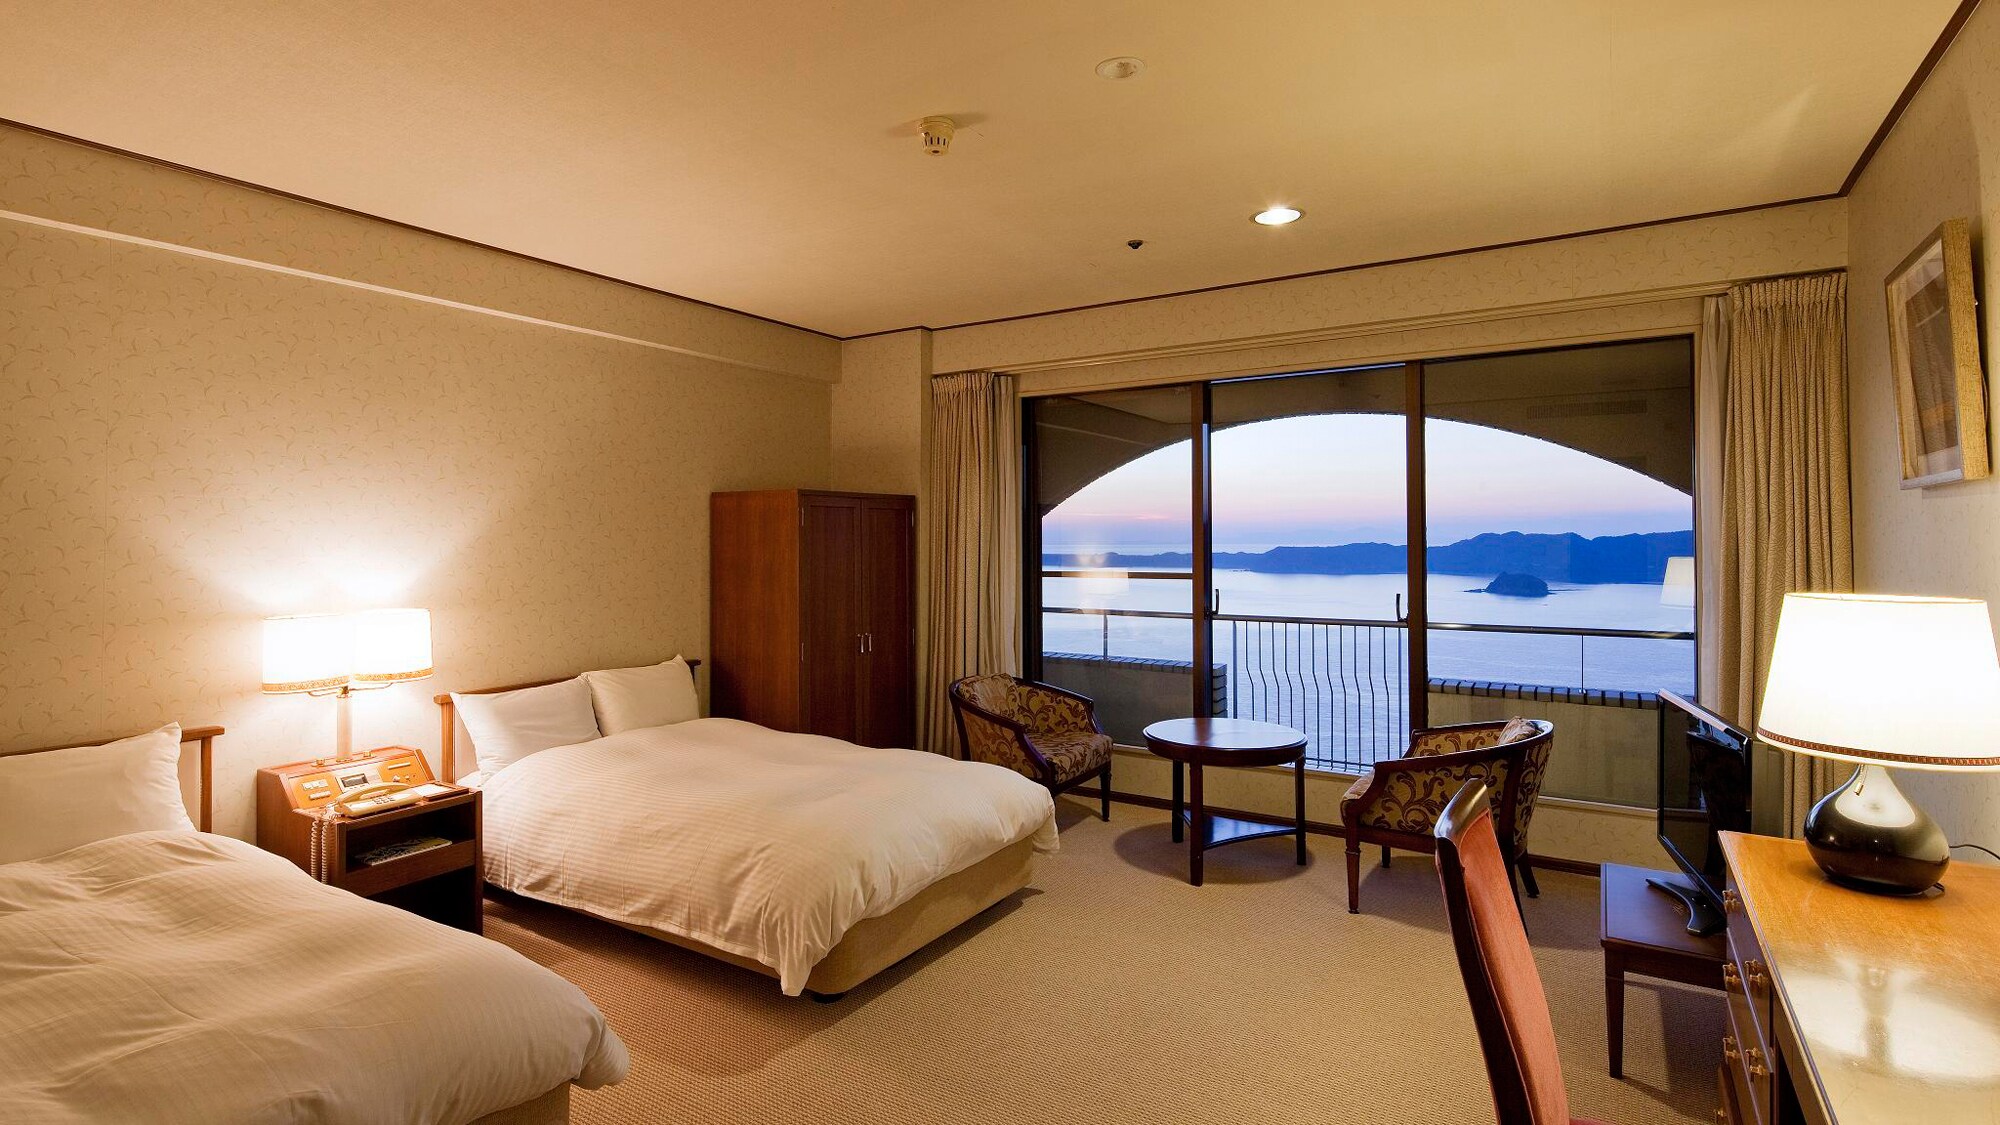 34 square meters standard Western-style room overlooking the Naruto Strait